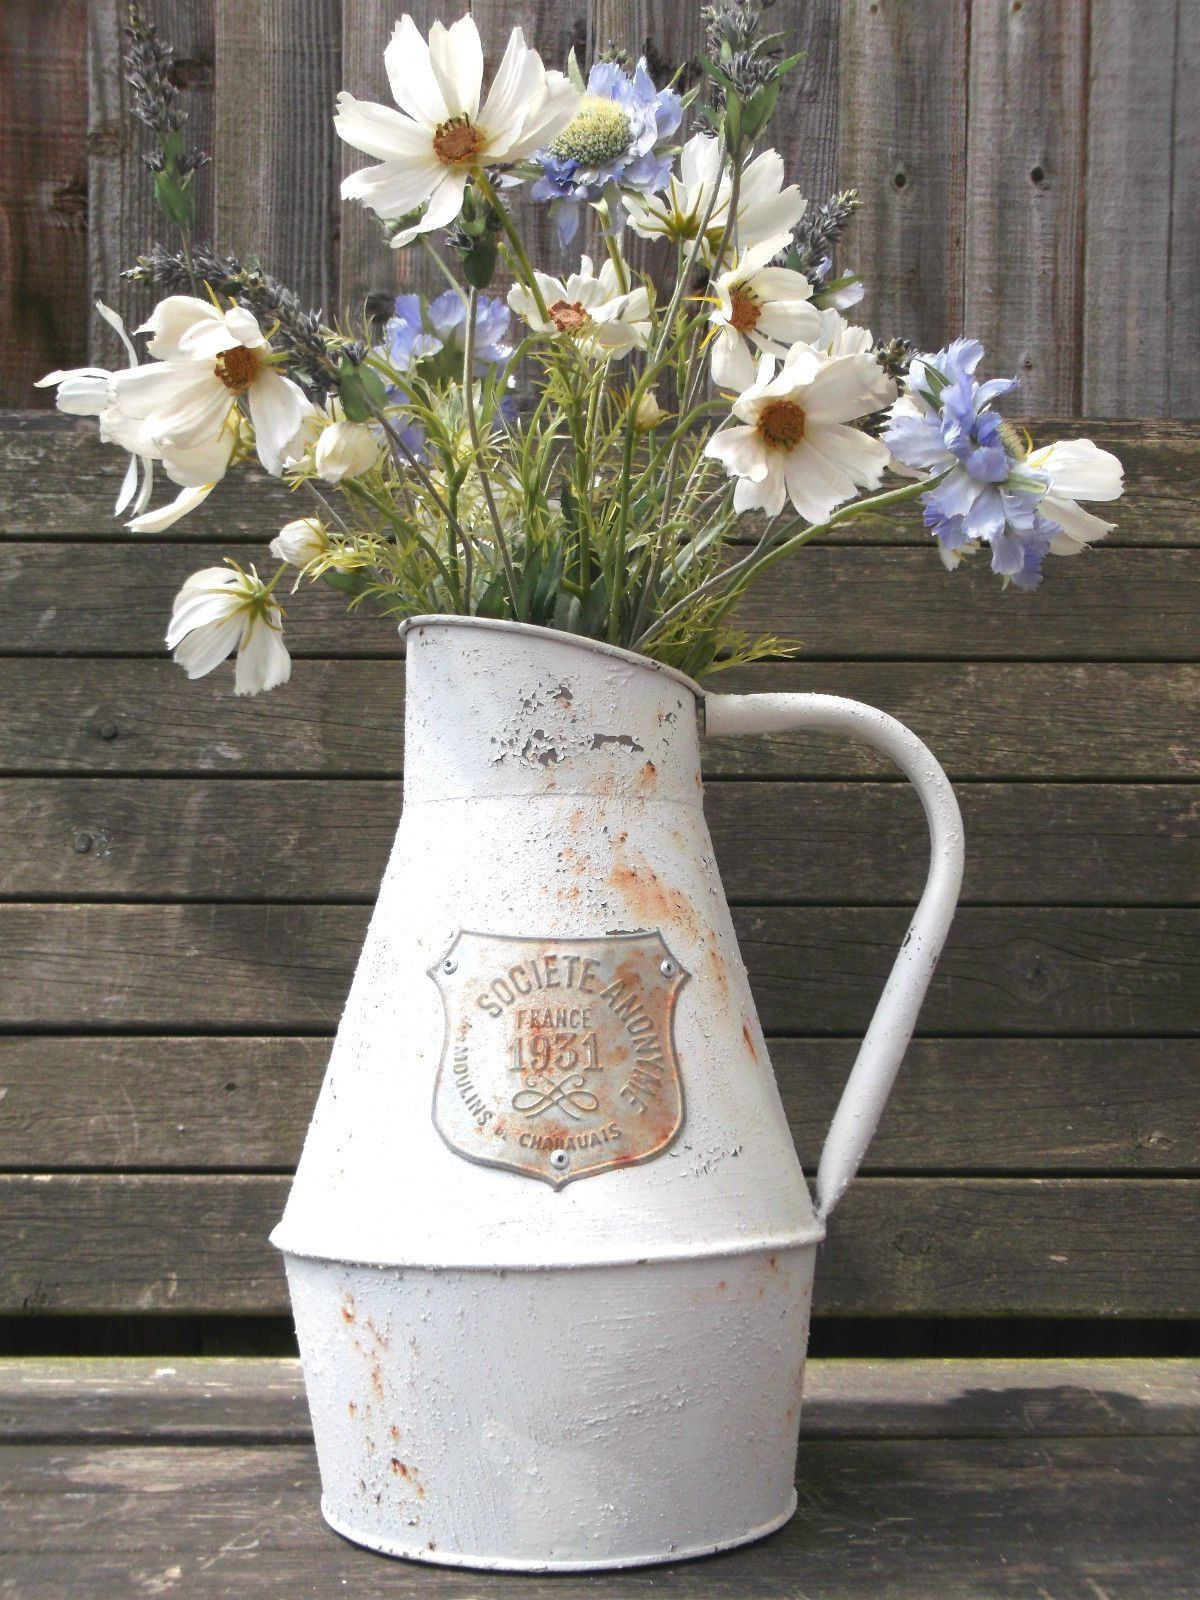 26 Great Large White Ceramic Vase 2024 free download large white ceramic vase of 30 copper flower vase the weekly world intended for french flower bucket h vases galvanized french vase tin bucketi 0d